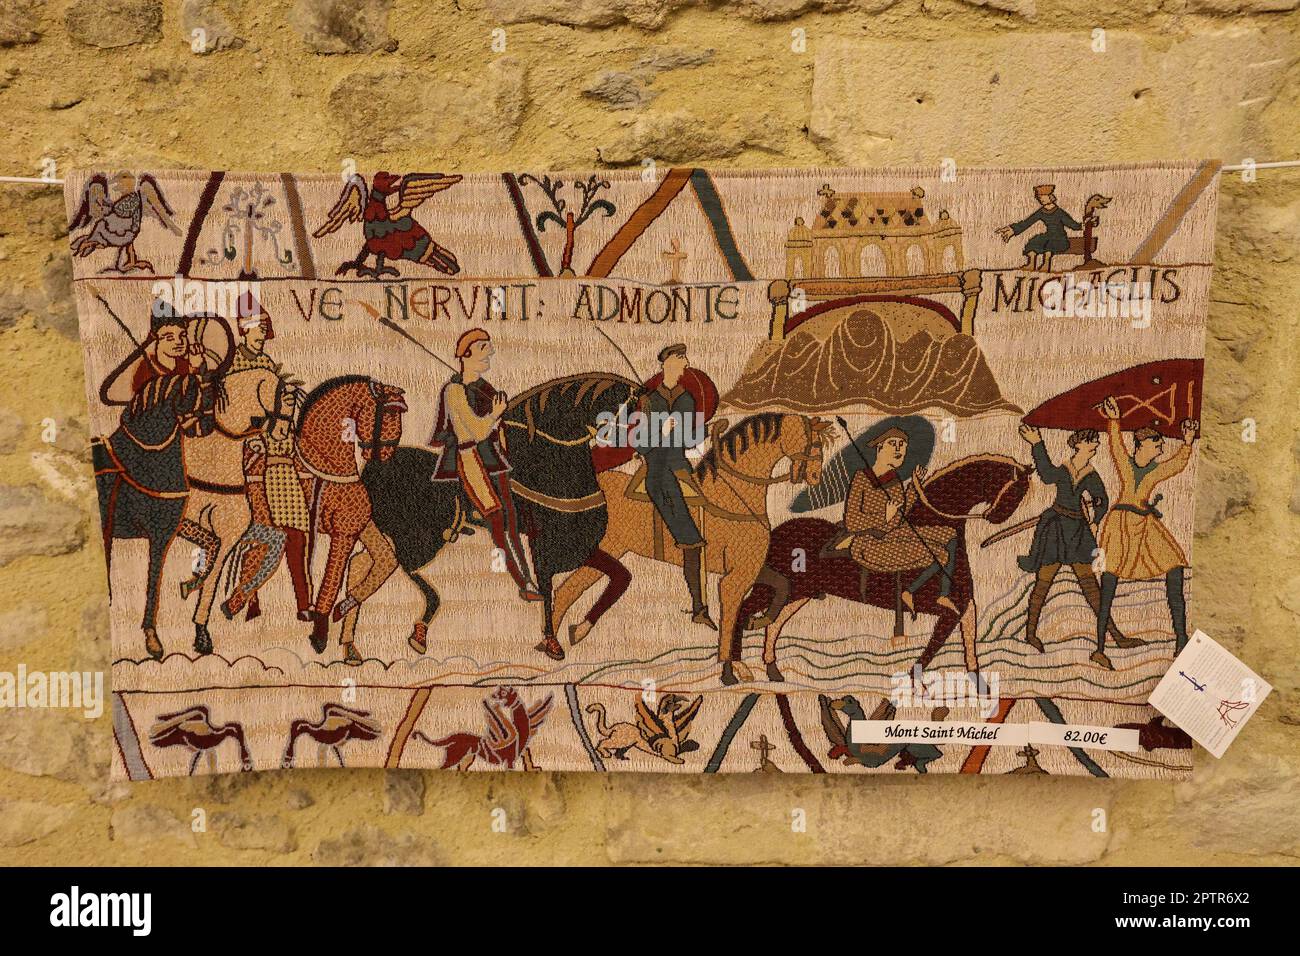 Bayeux,a,town,commune,in,the,Calvados,department,in,Normandy,Normandie,in,northwestern,France,French,Europe,European,Bayeux,is,home,to,the,Bayeux Tapestry,which,depicts,the,events,leading,up,yo,the, Norman Conquest,of England,in,1066. Stock Photo